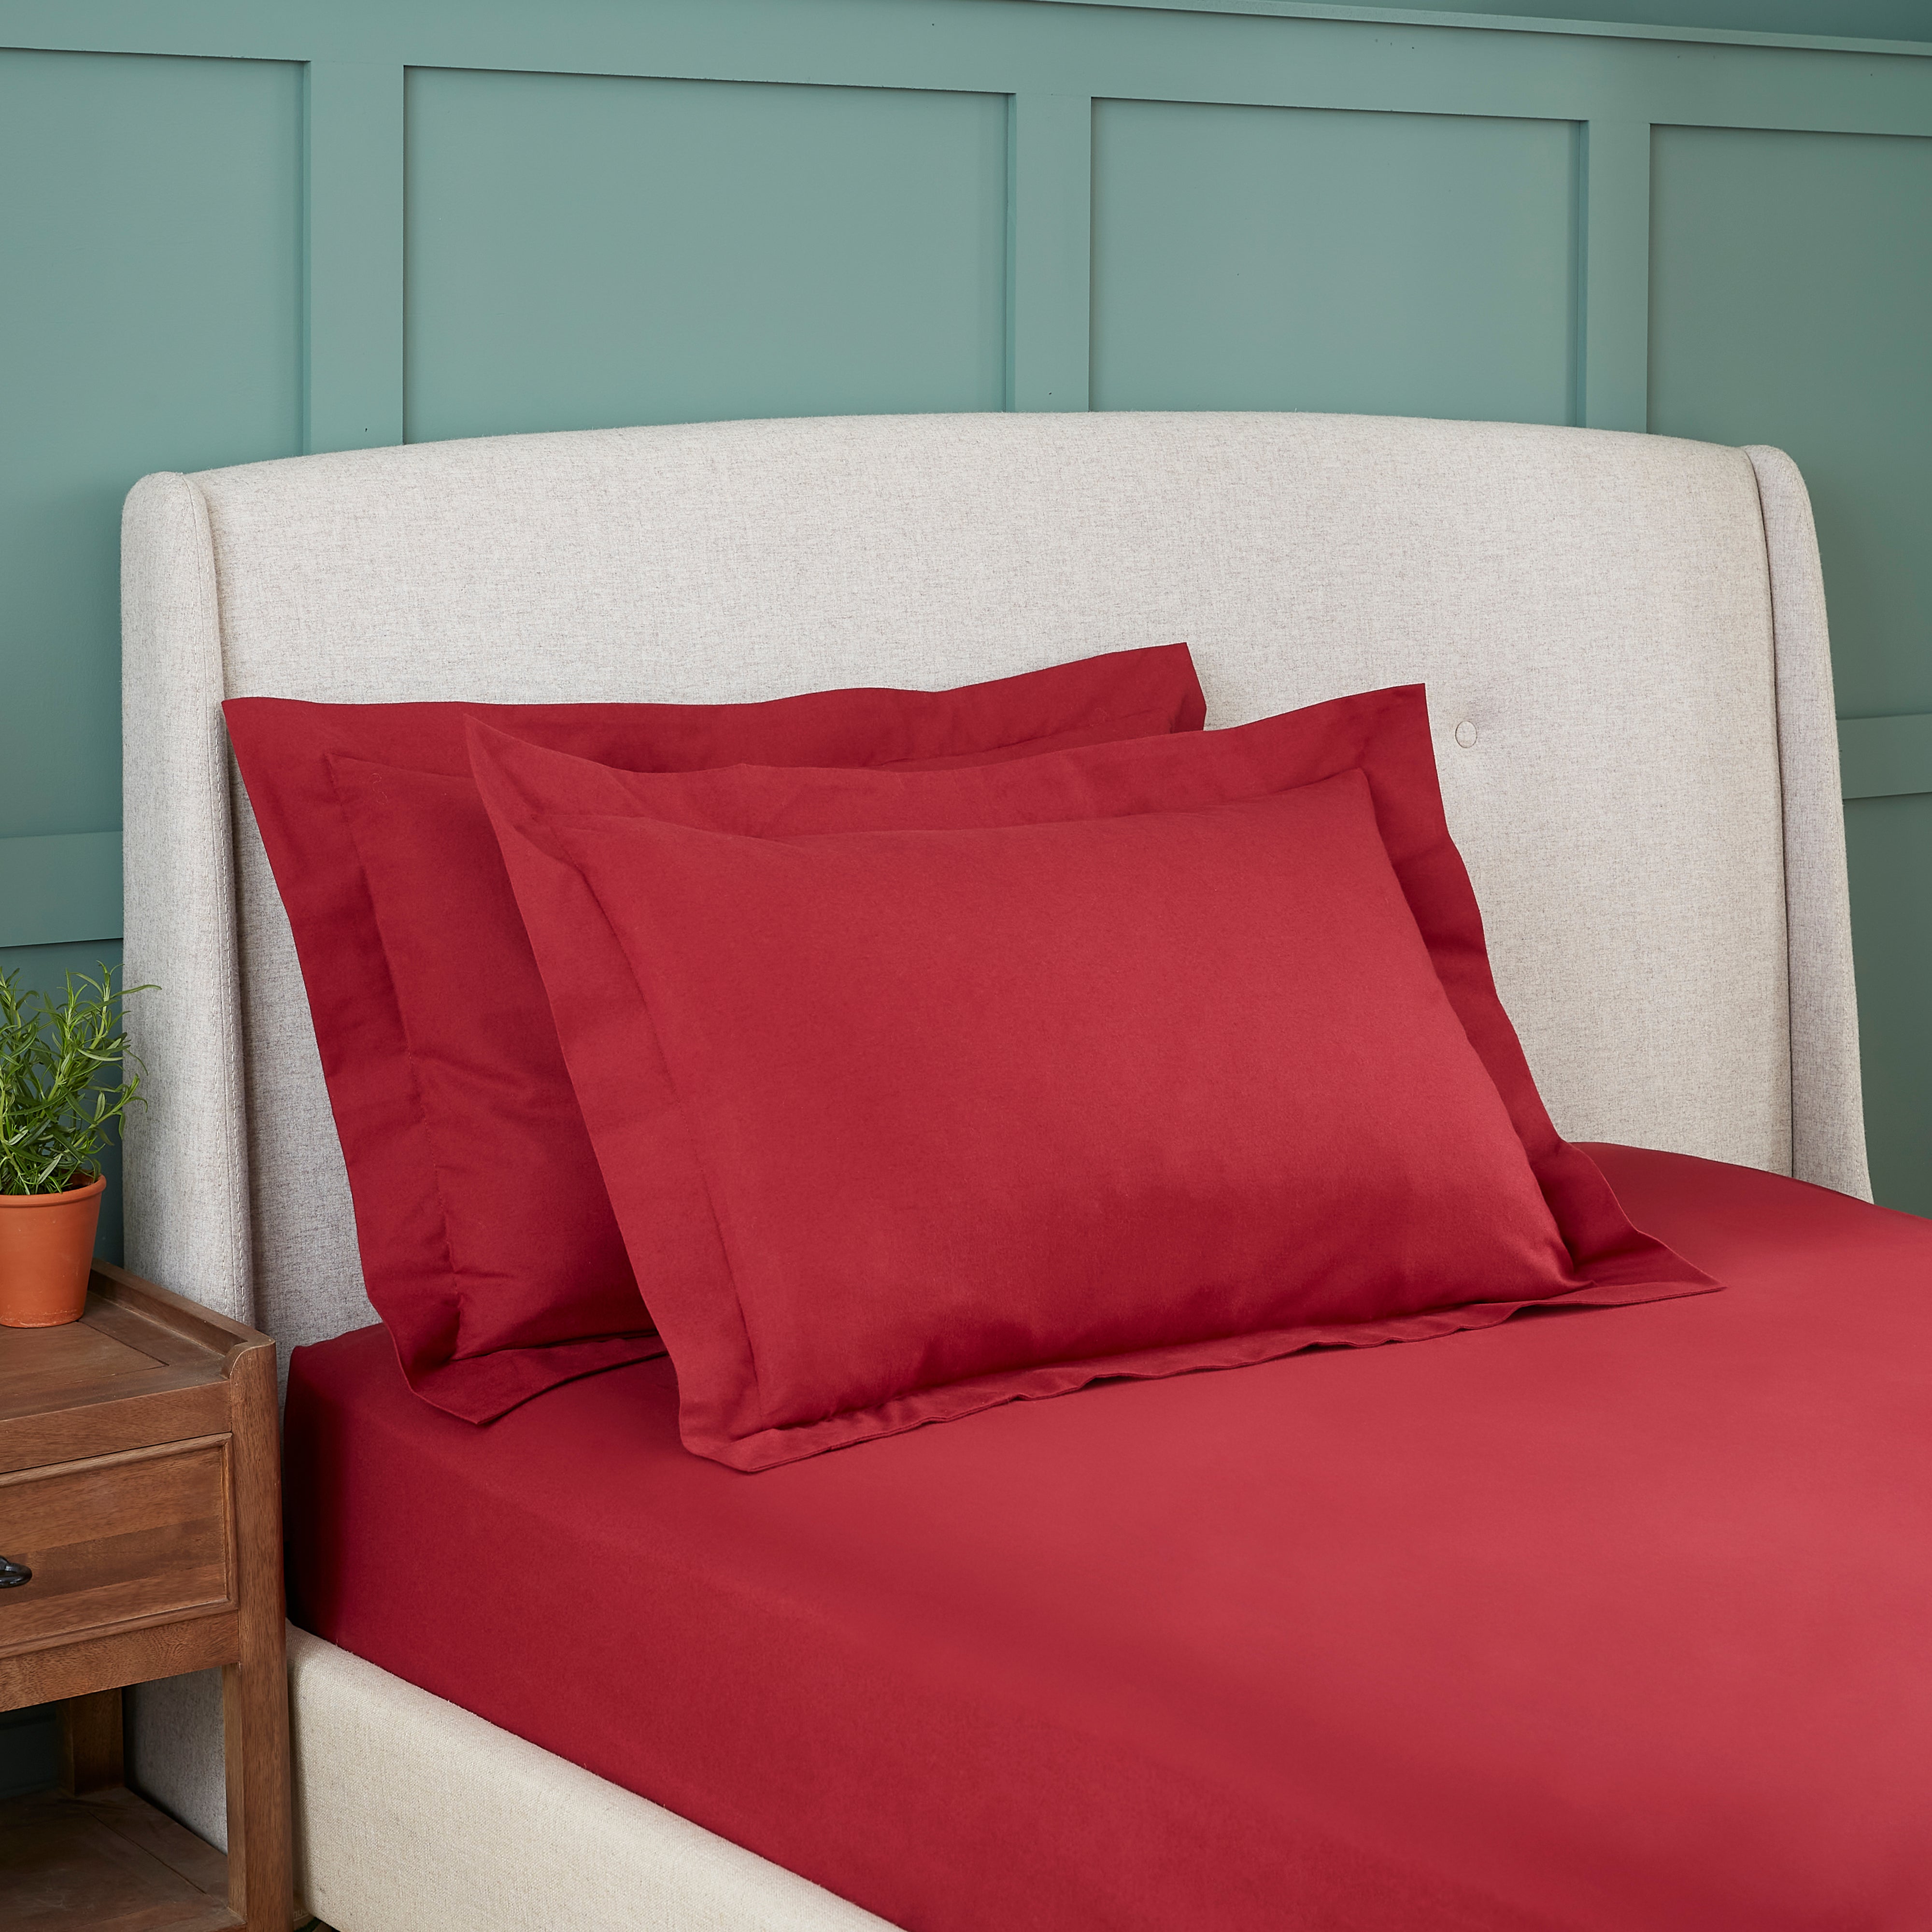 Dorma Brushed Cotton Oxford Pillowcase Pair Red